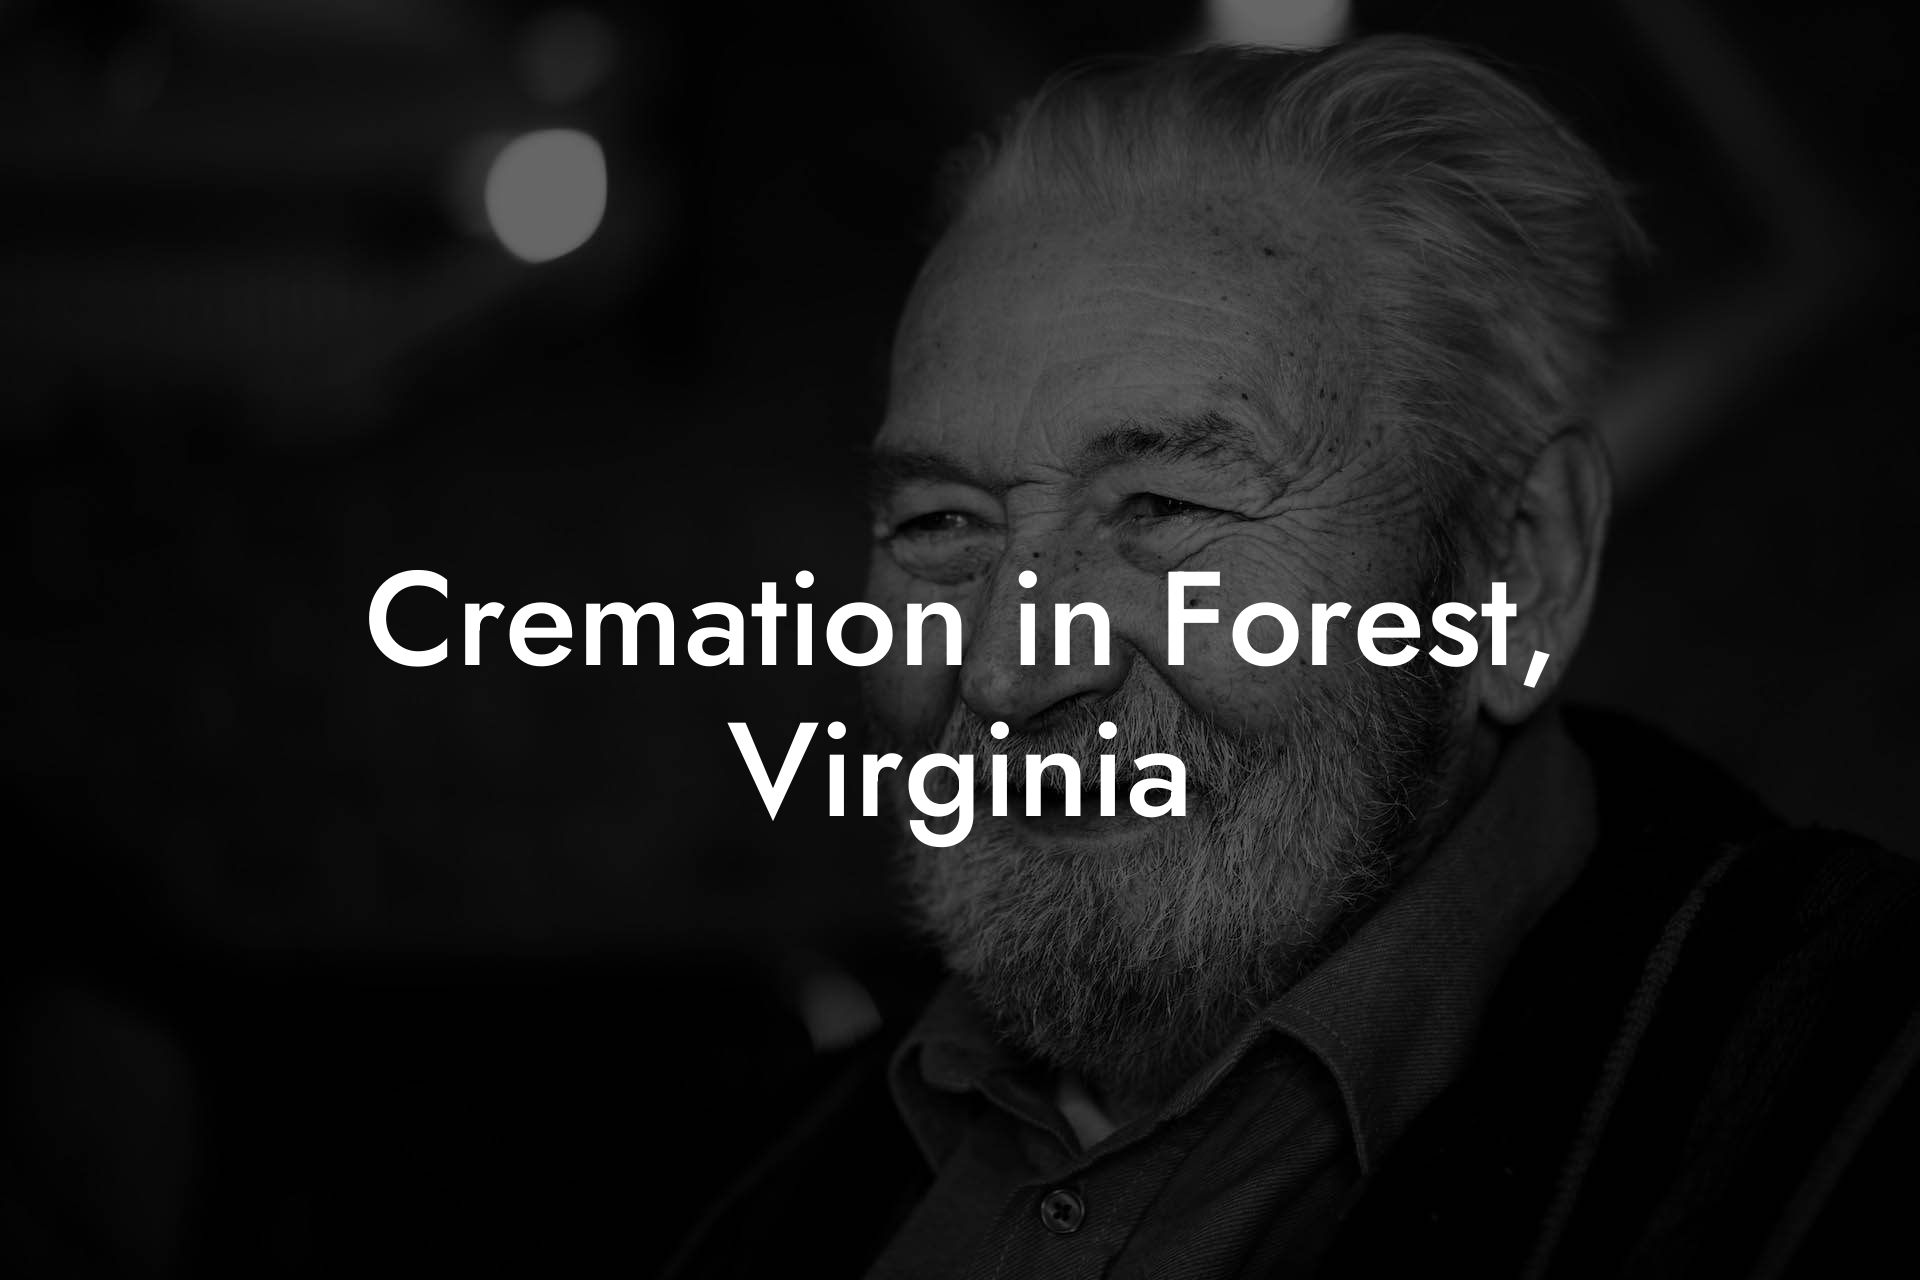 Cremation in Forest, Virginia